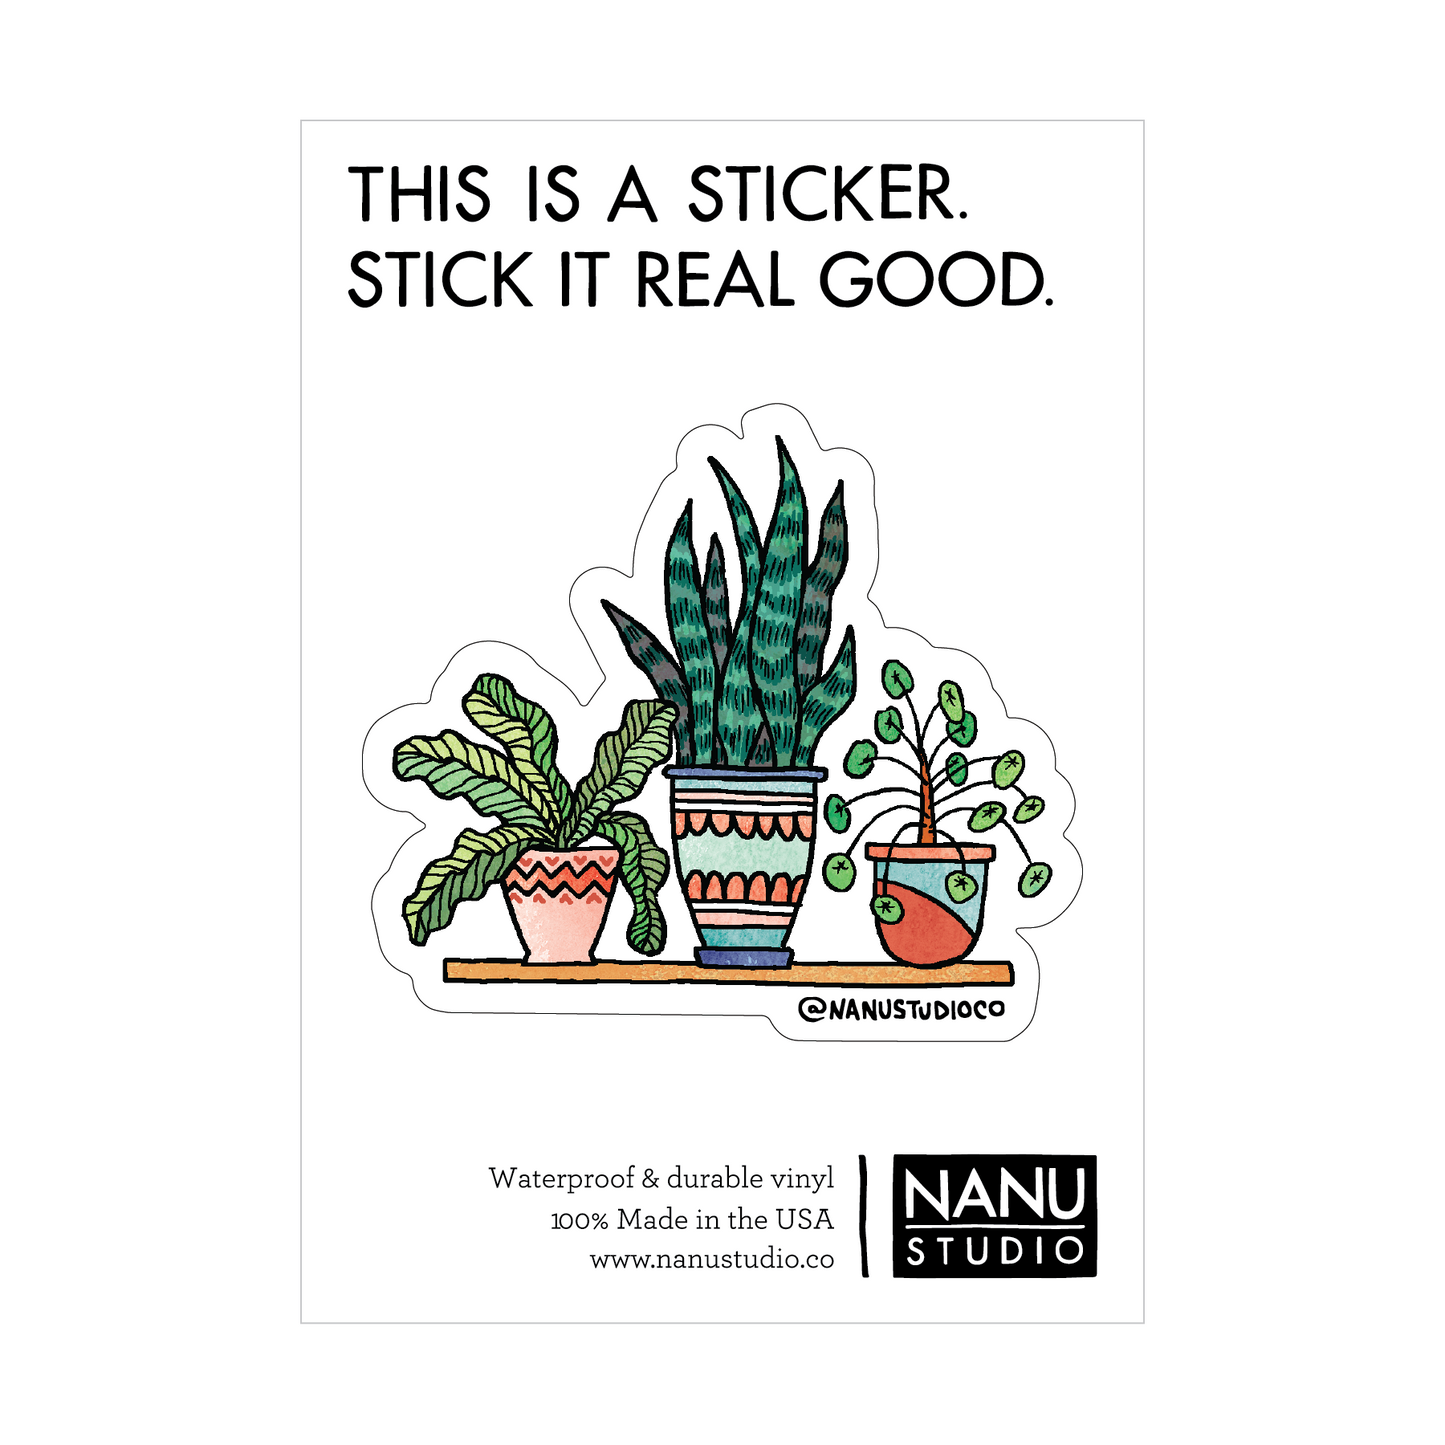 An illustrated sticker featuring three different plants in colourful planters sitting on a shelf